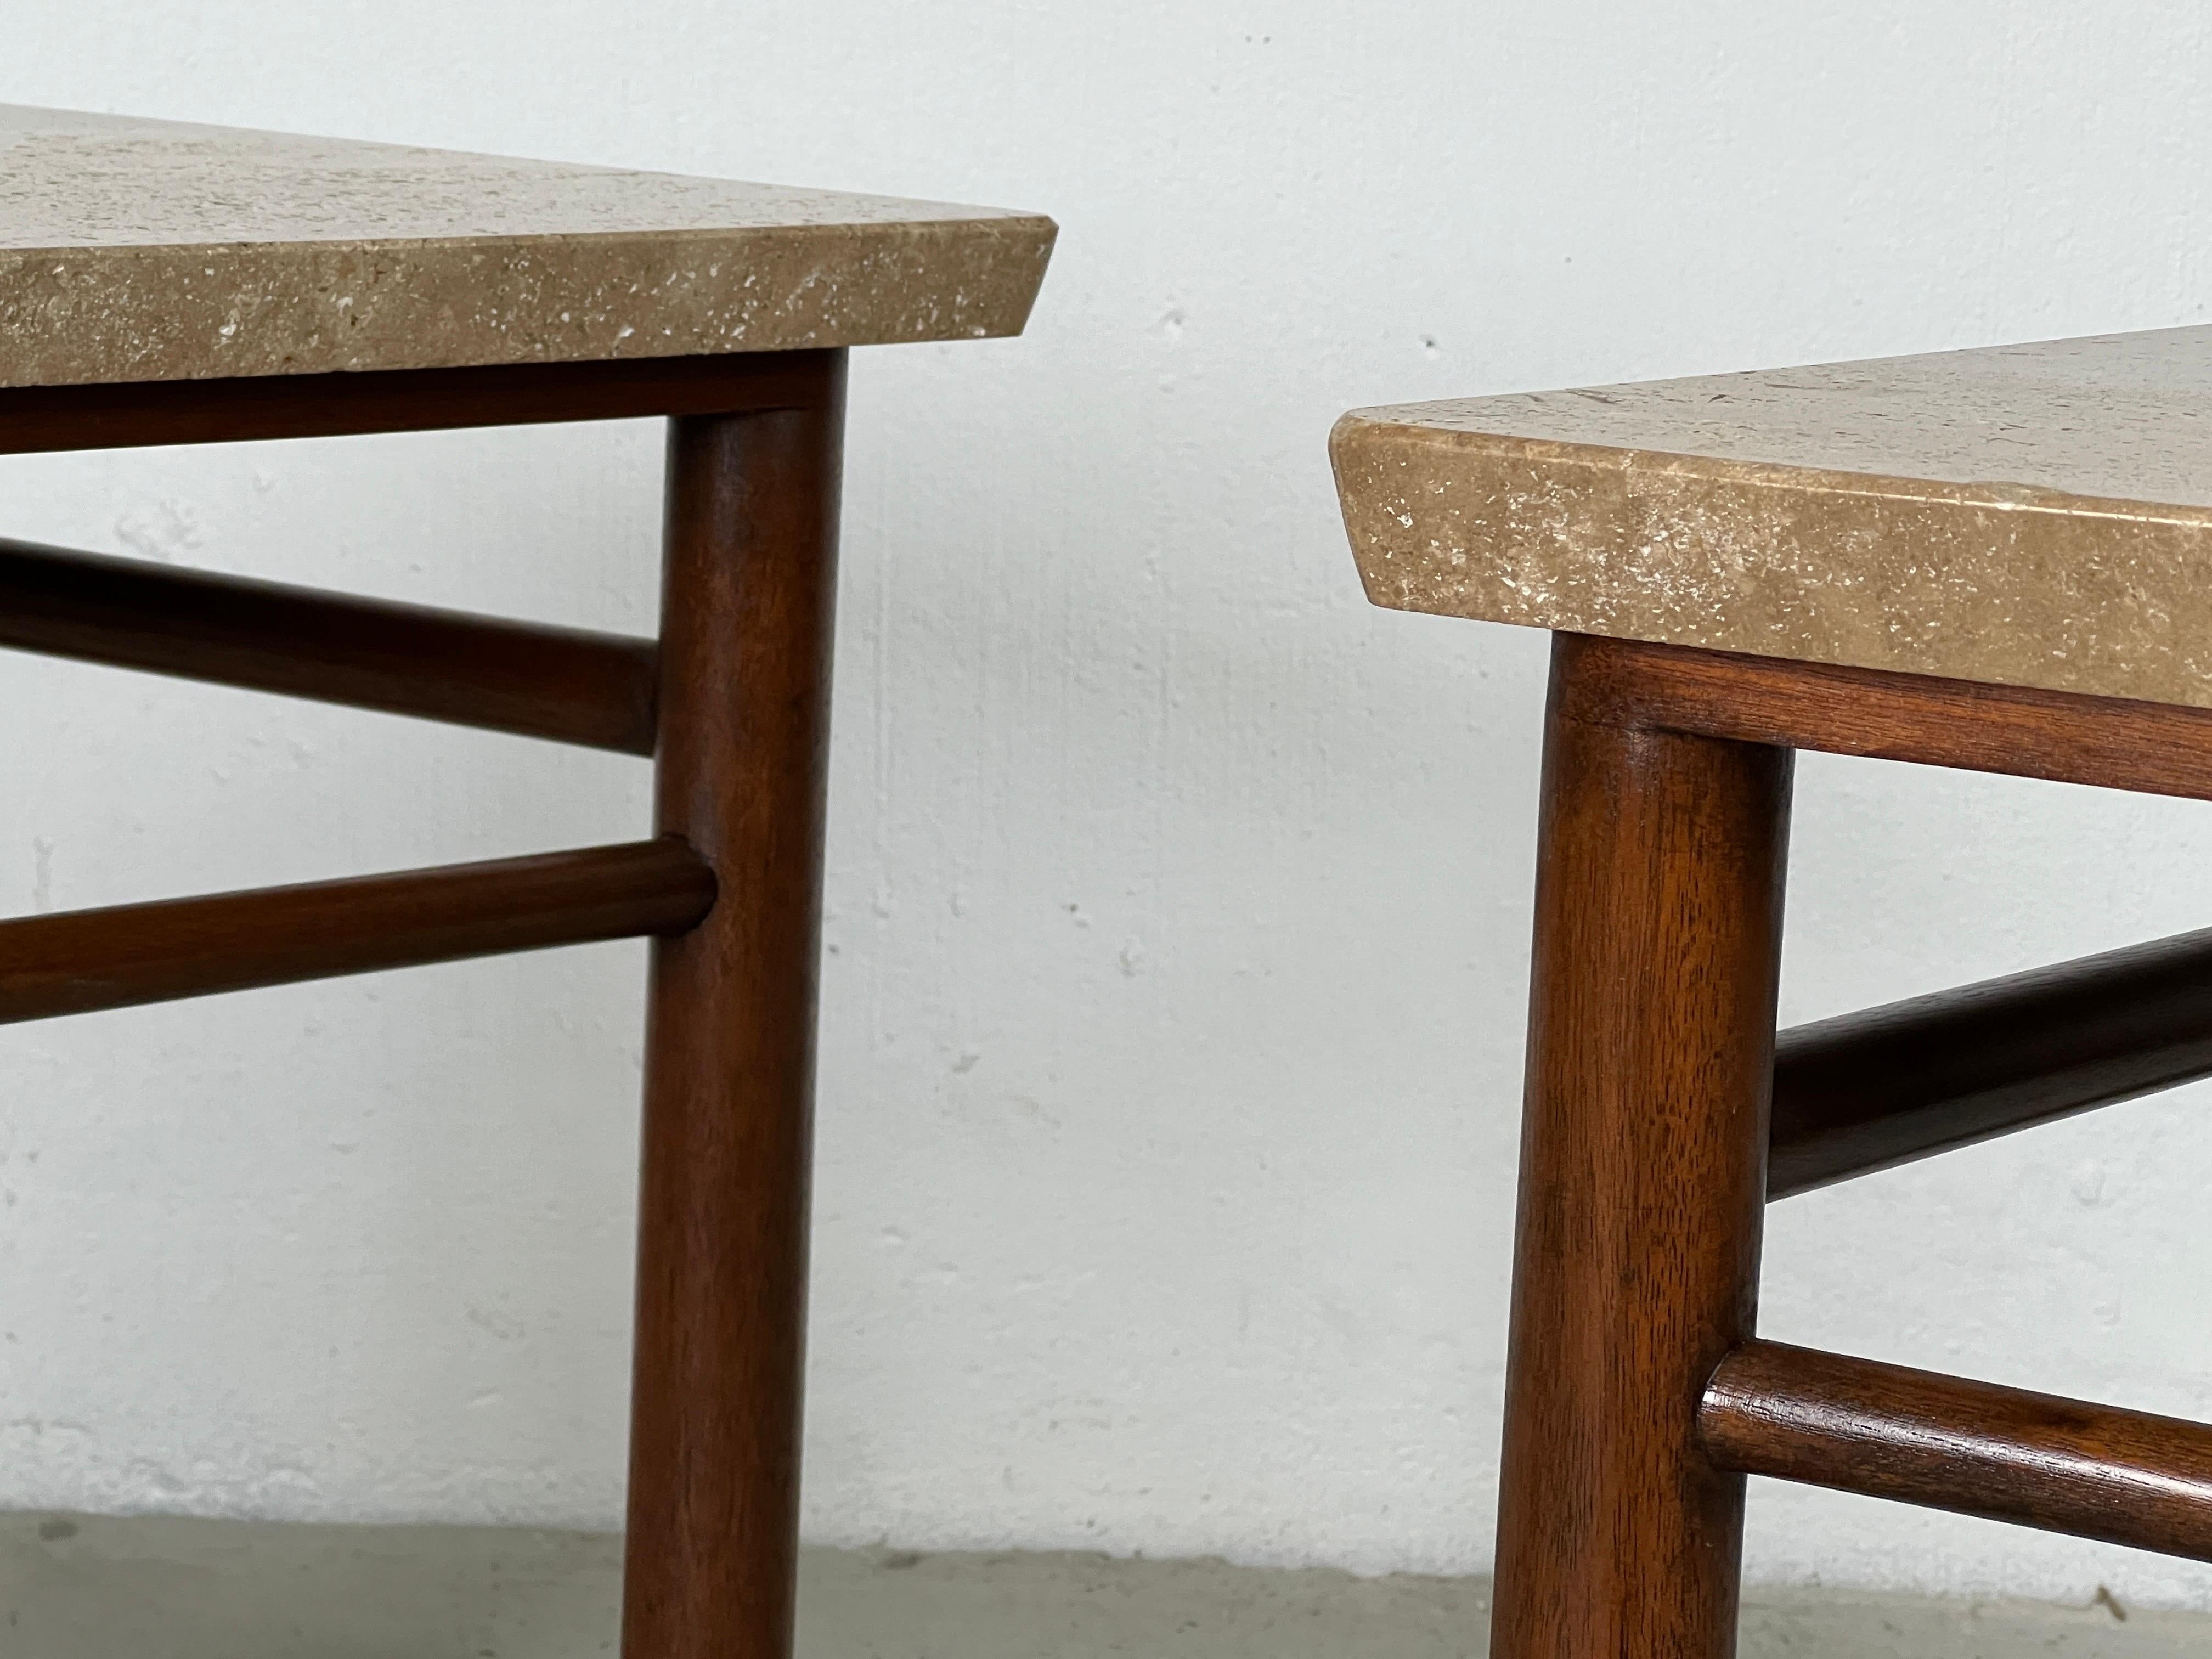 Pair of Wedge Shaped Travertine Tables by Edward Wormley for Dunbar For Sale 4